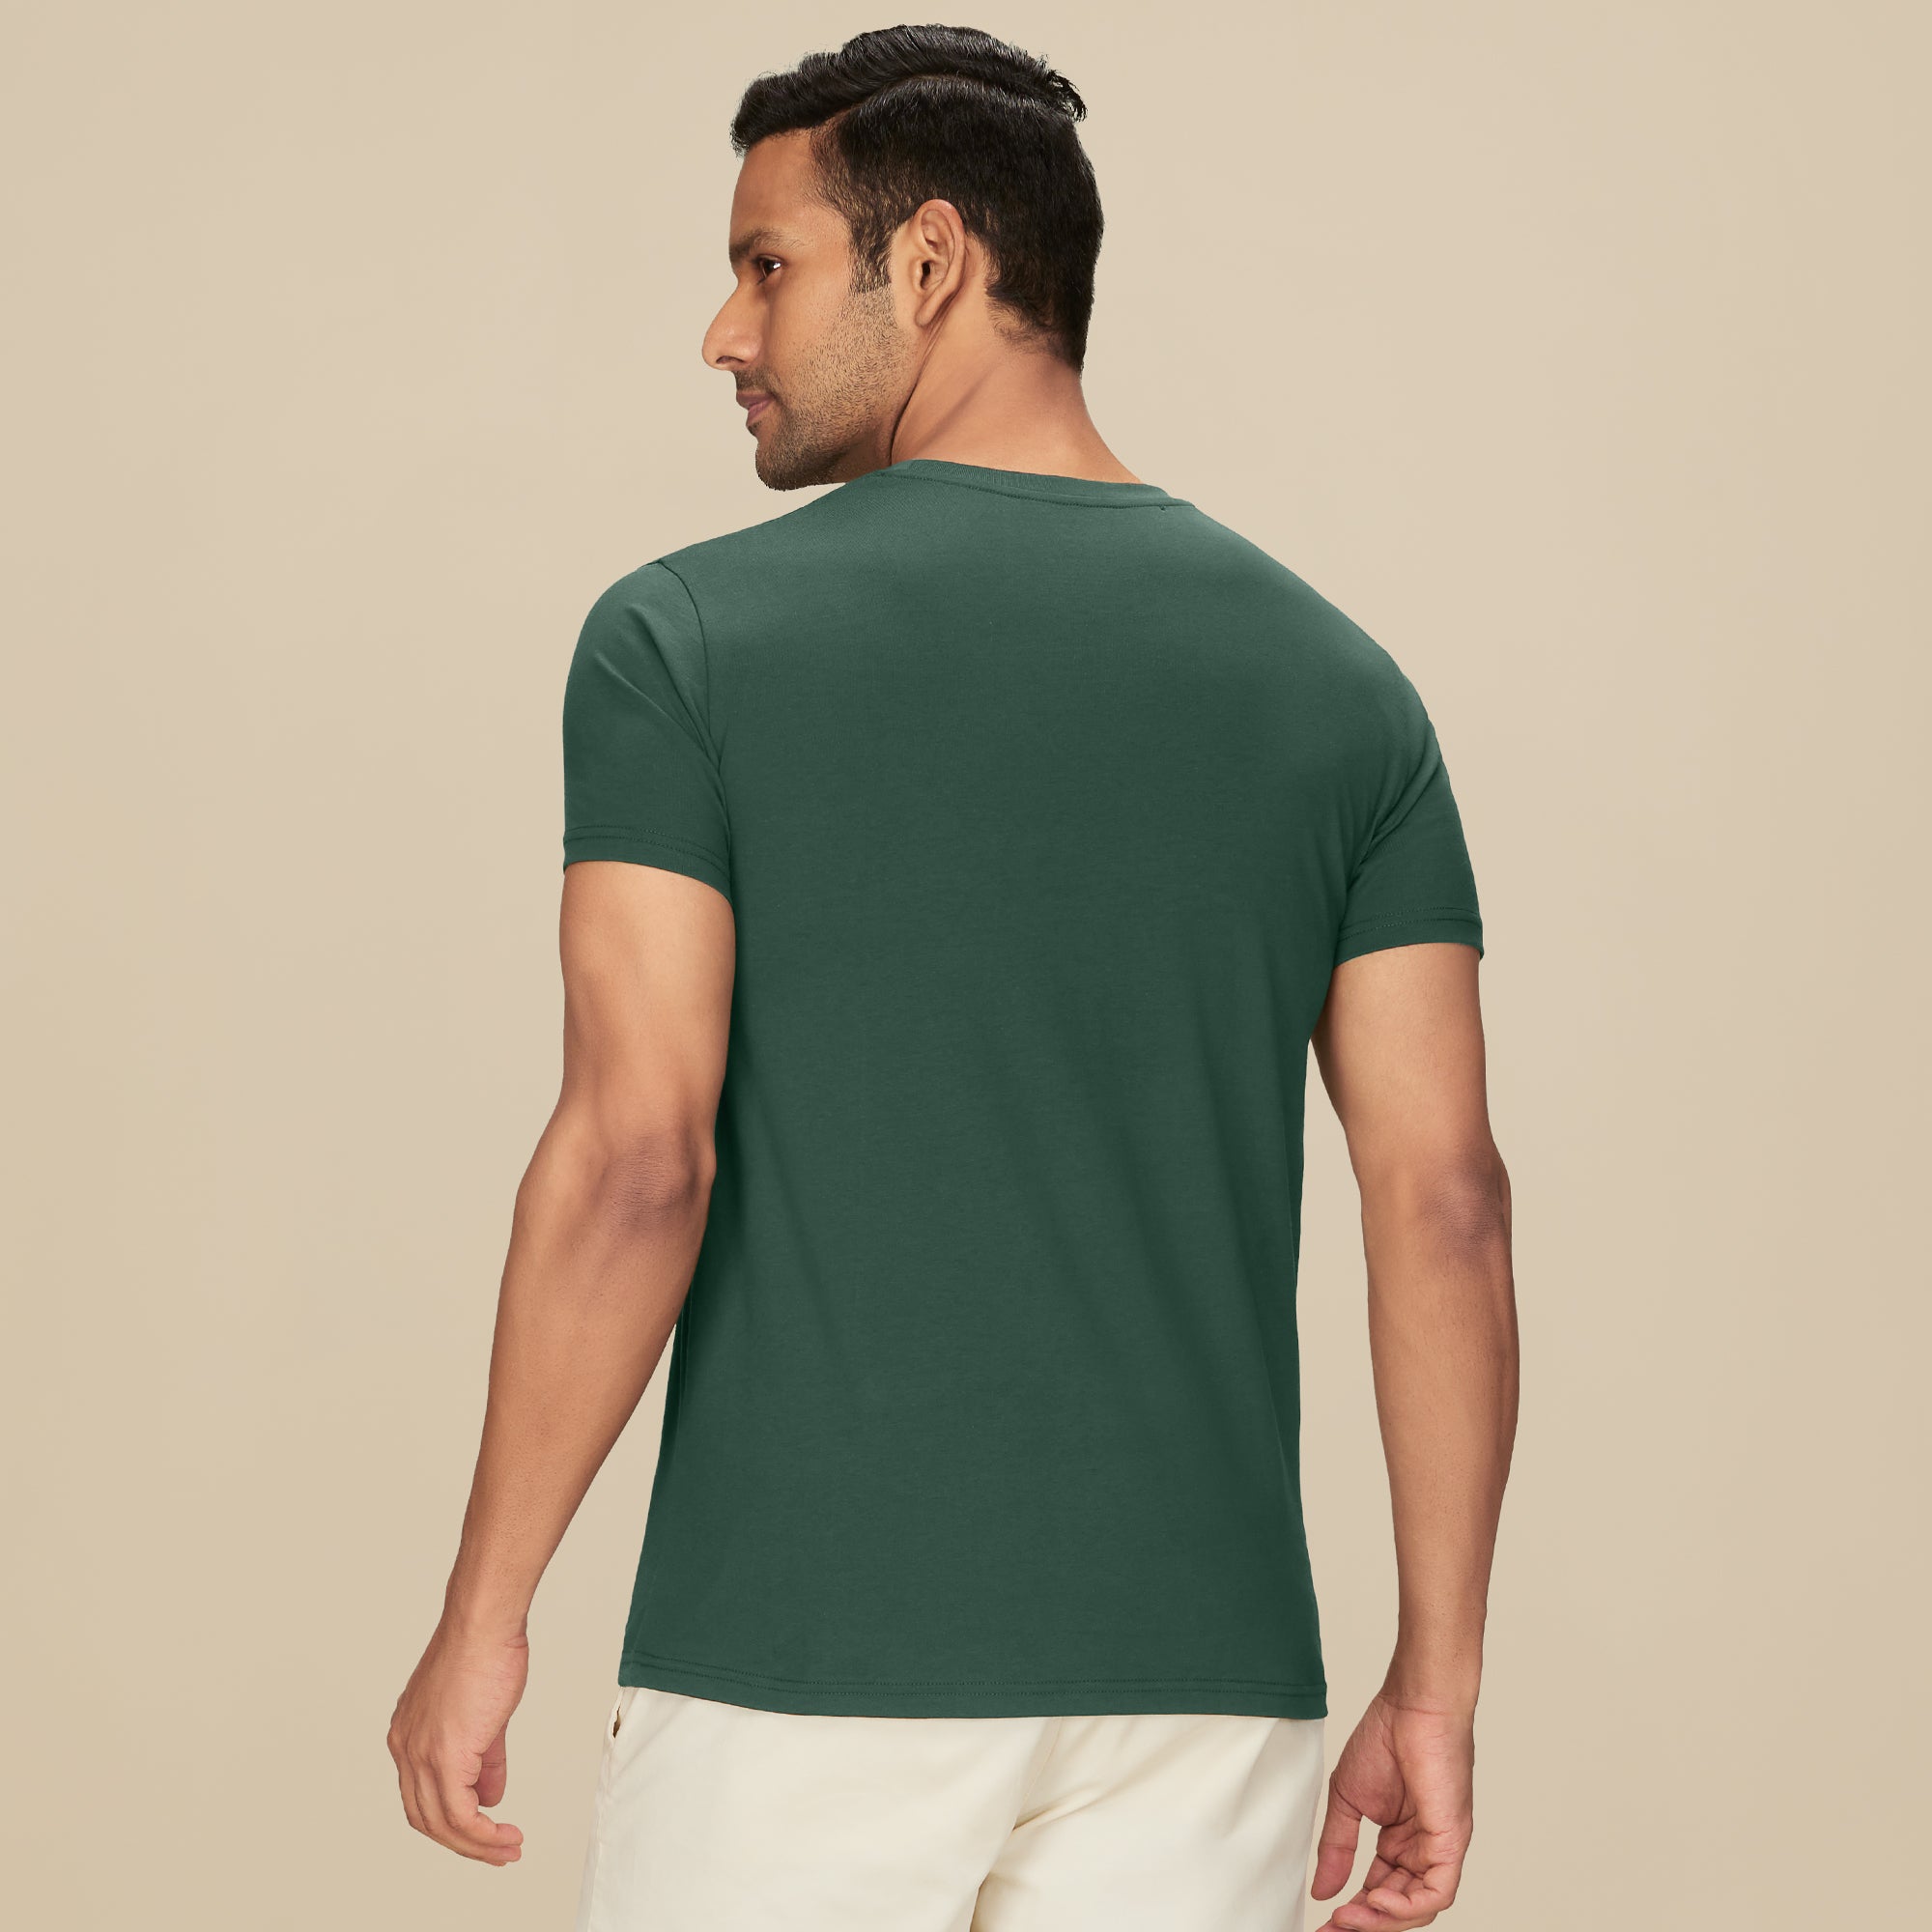 Pace Combed Cotton T-shirt for men Pine Green - XYXX Mens Apparels